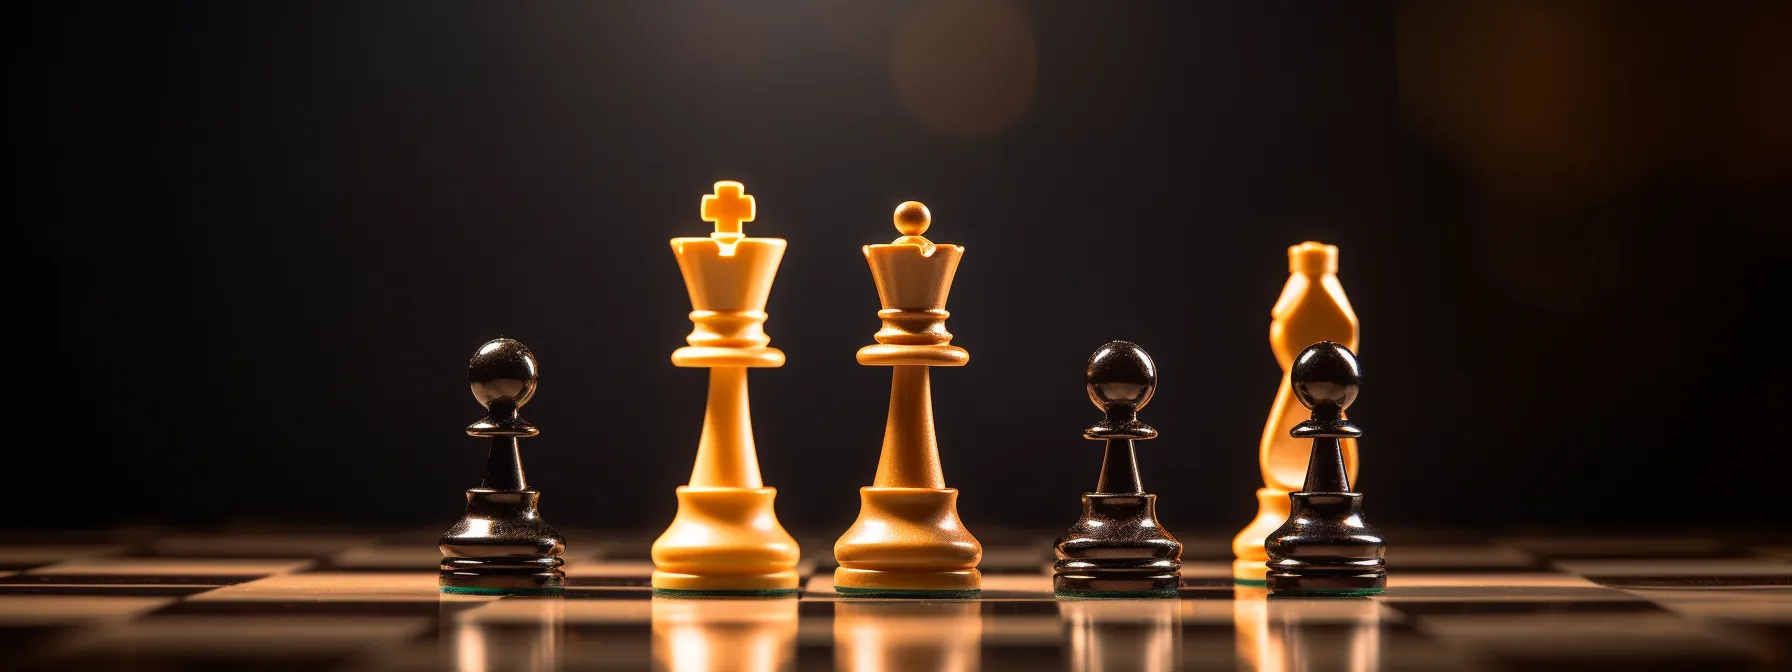 A Group Of Chess Pieces Representing The Marketing Team, Strategically Positioned On A Chessboard.